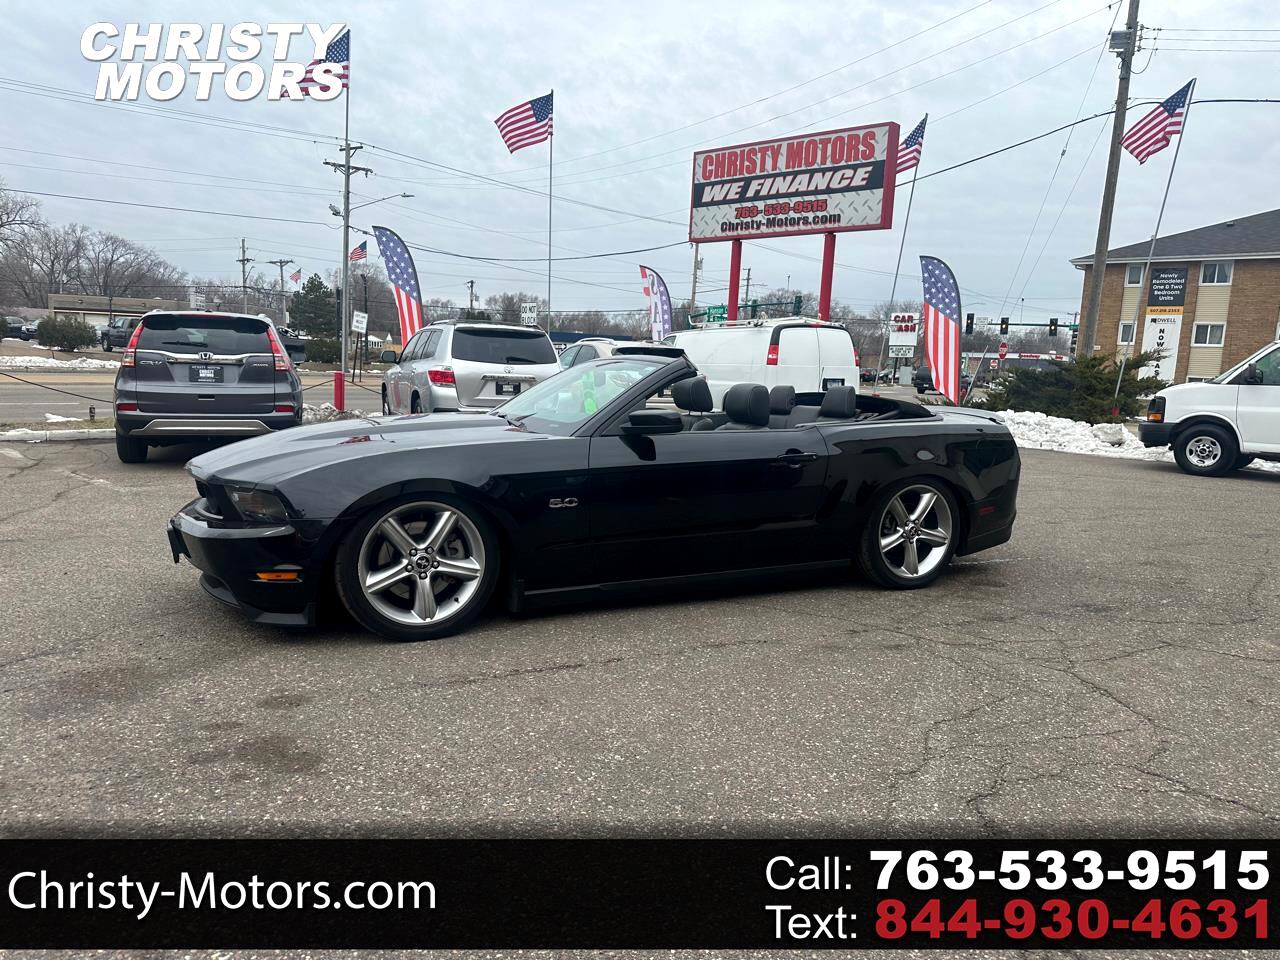 2011 Ford Mustang GT convertible